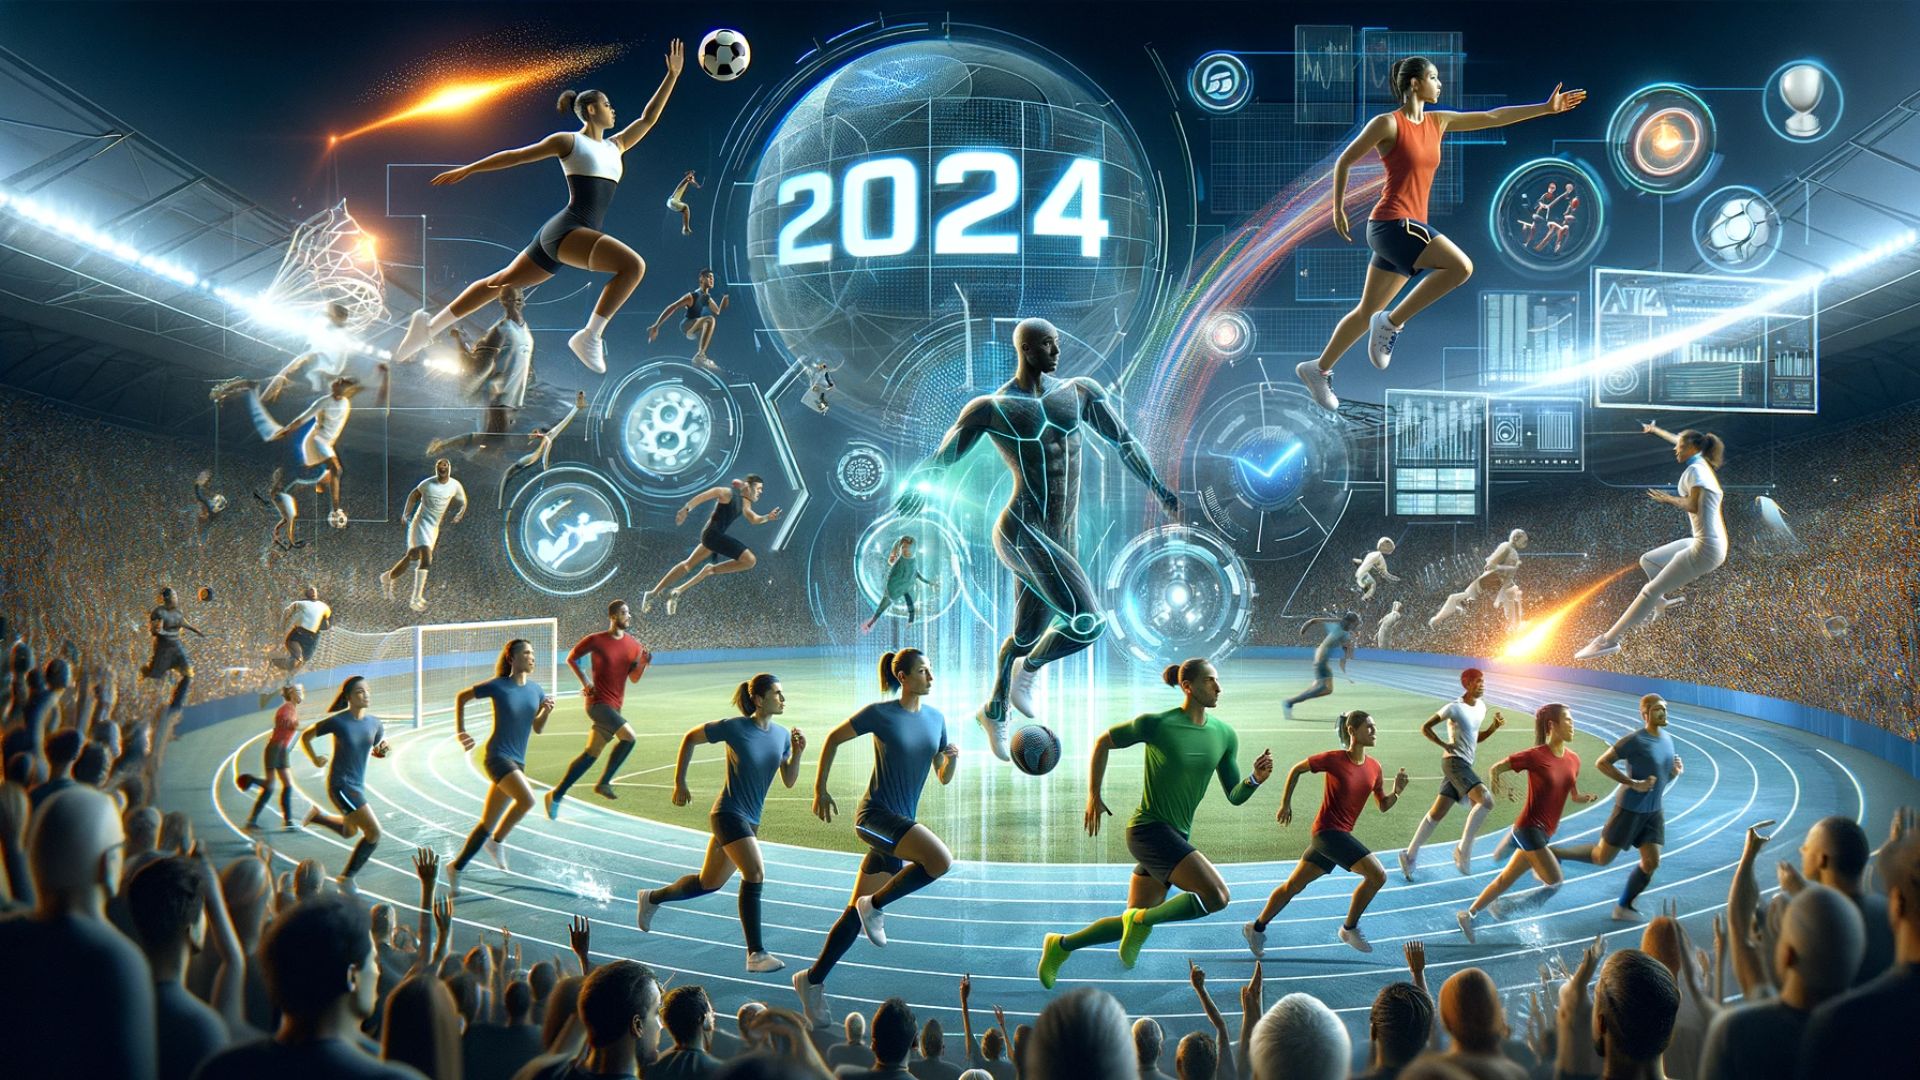 2024 in sports innovation image